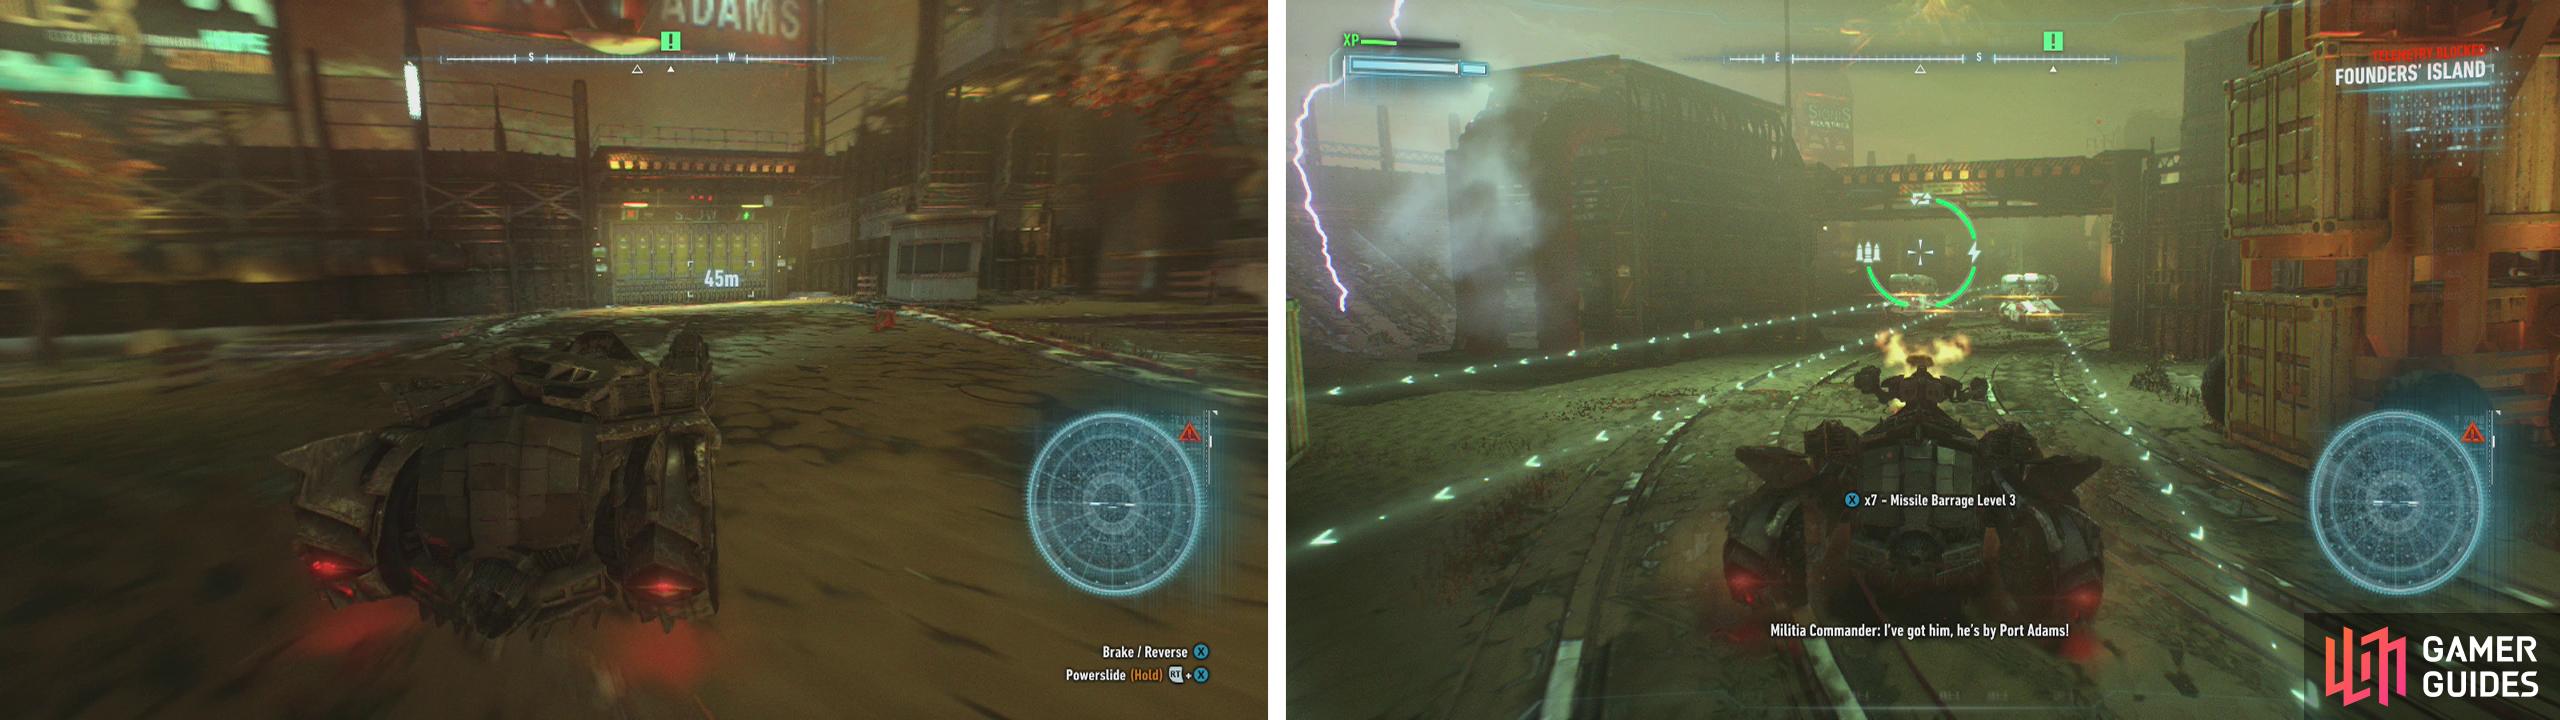 Enter Port Adams (left) and fight off the Drone Tanks within (right).